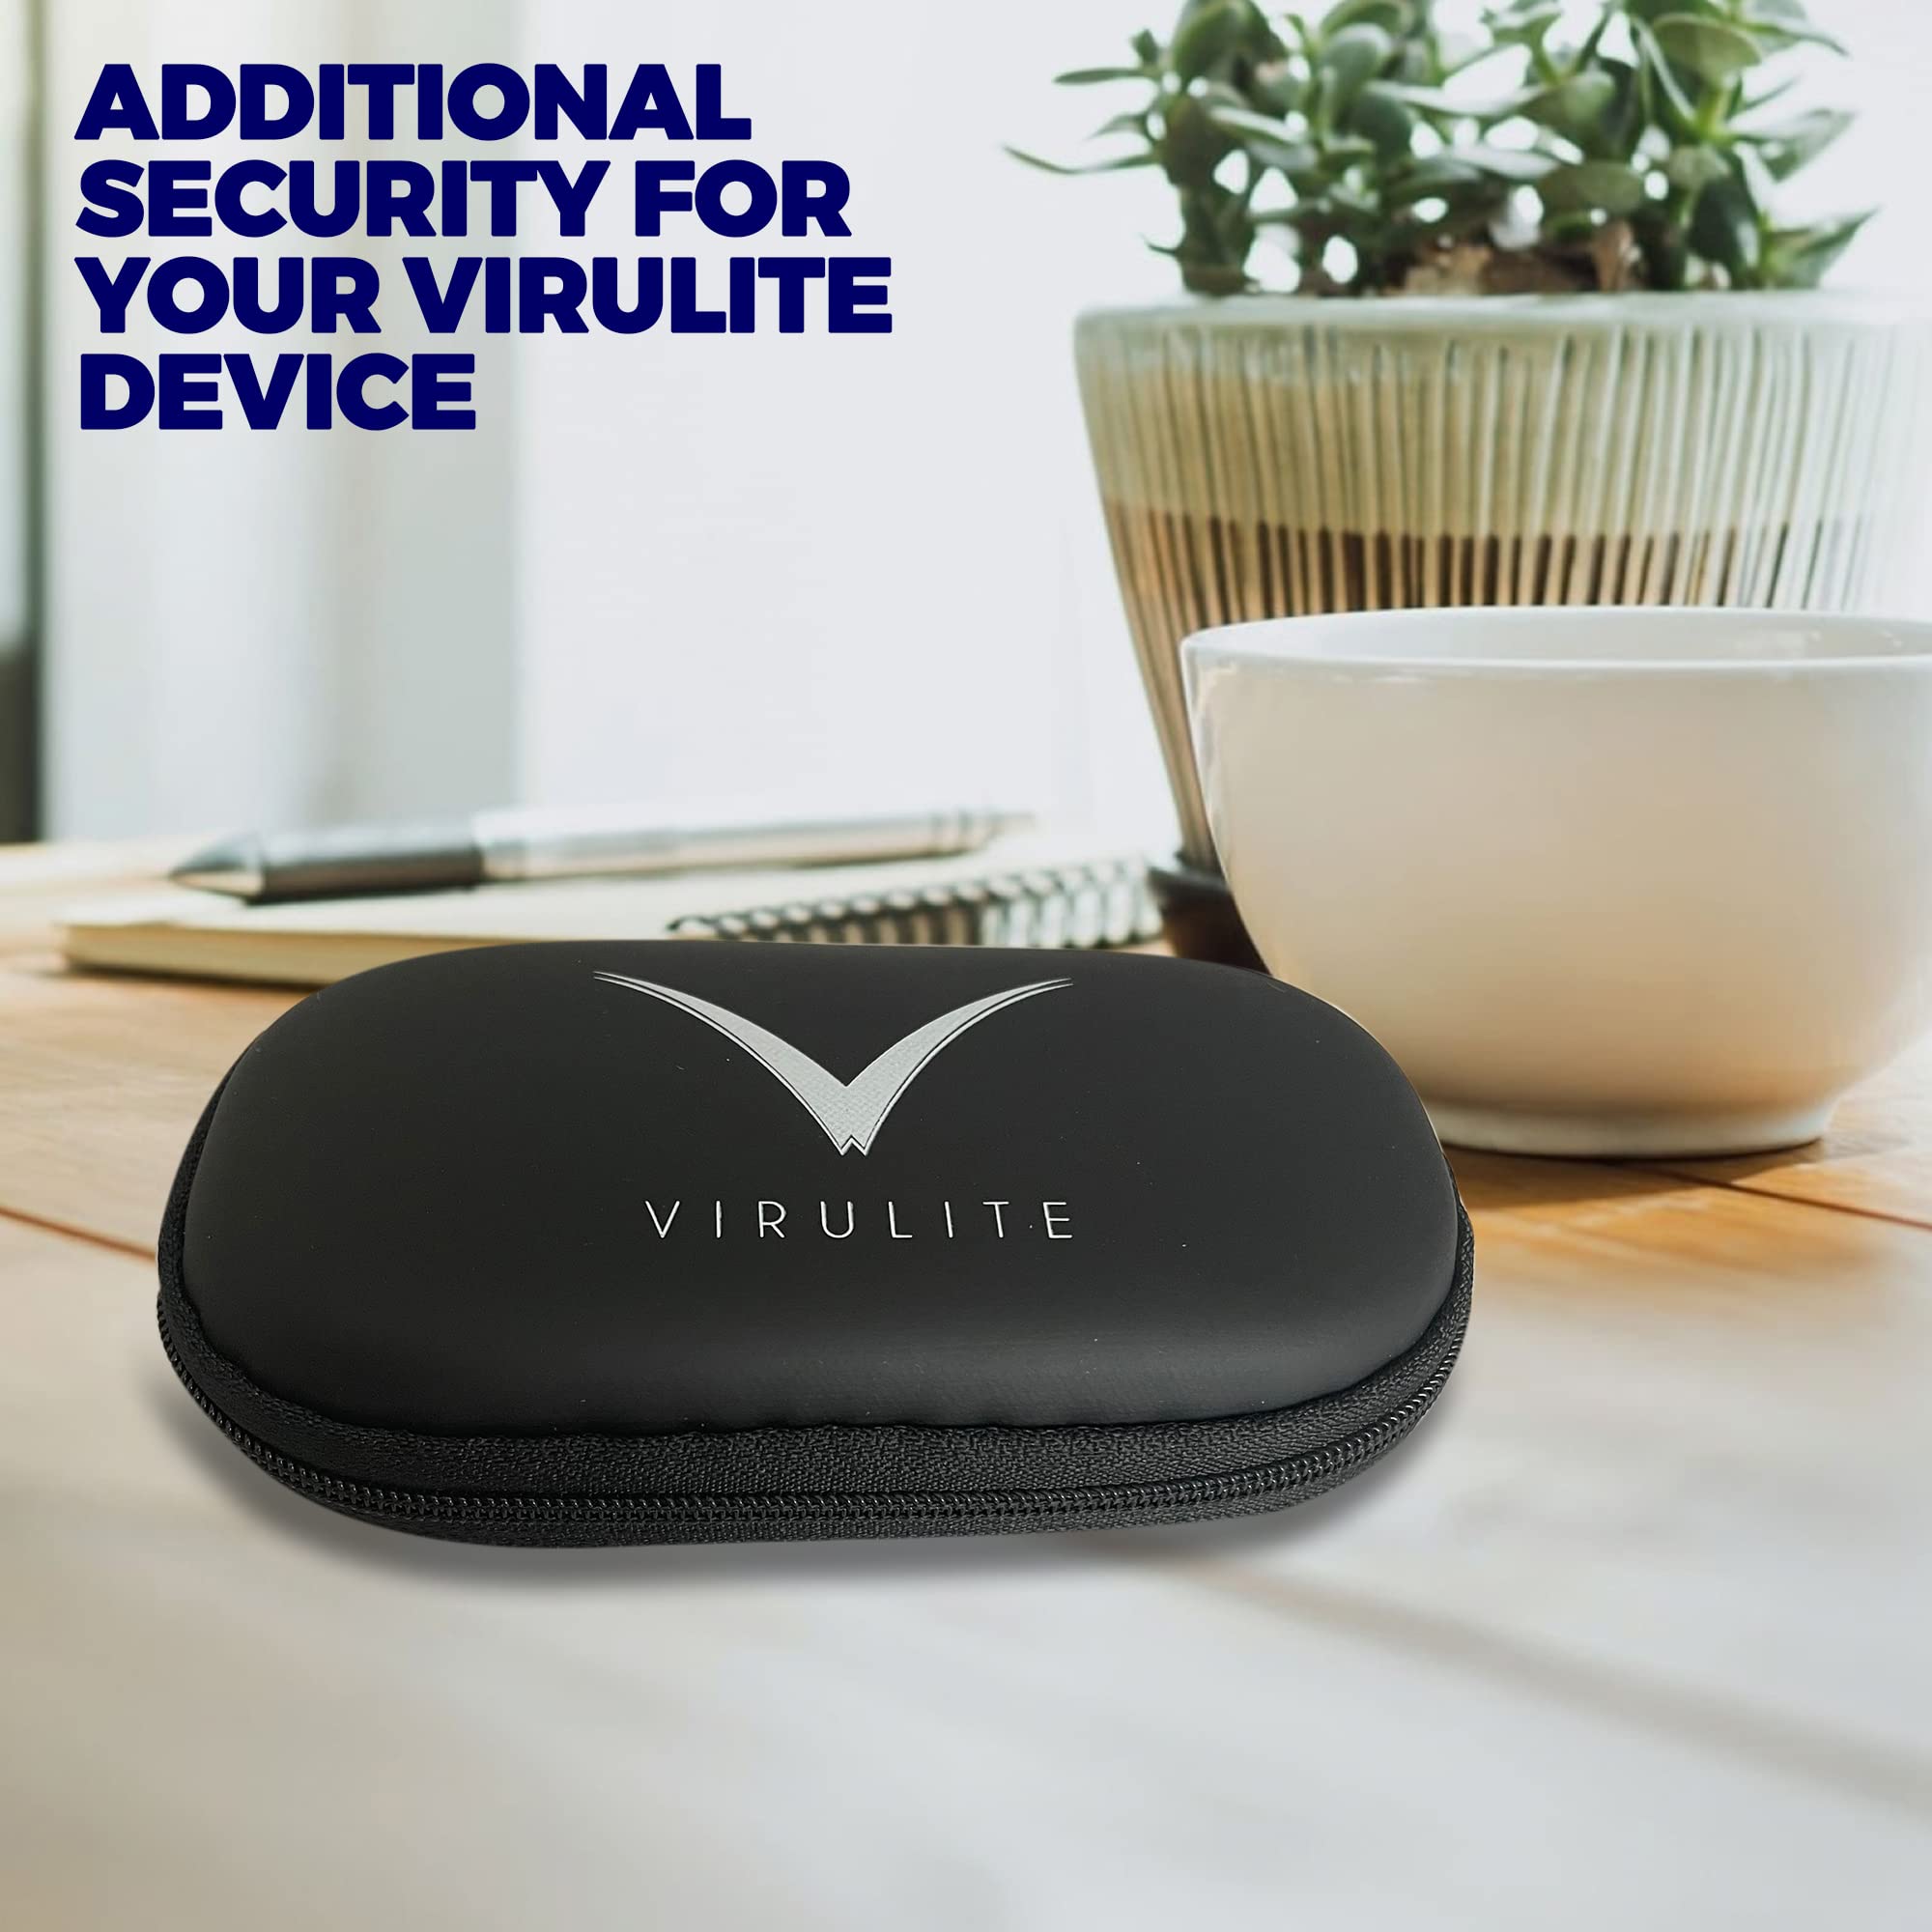 Virulite CS Bundle 2.0 with Protective Case The Only FDA Cleared Device for Cold Sore Treatment